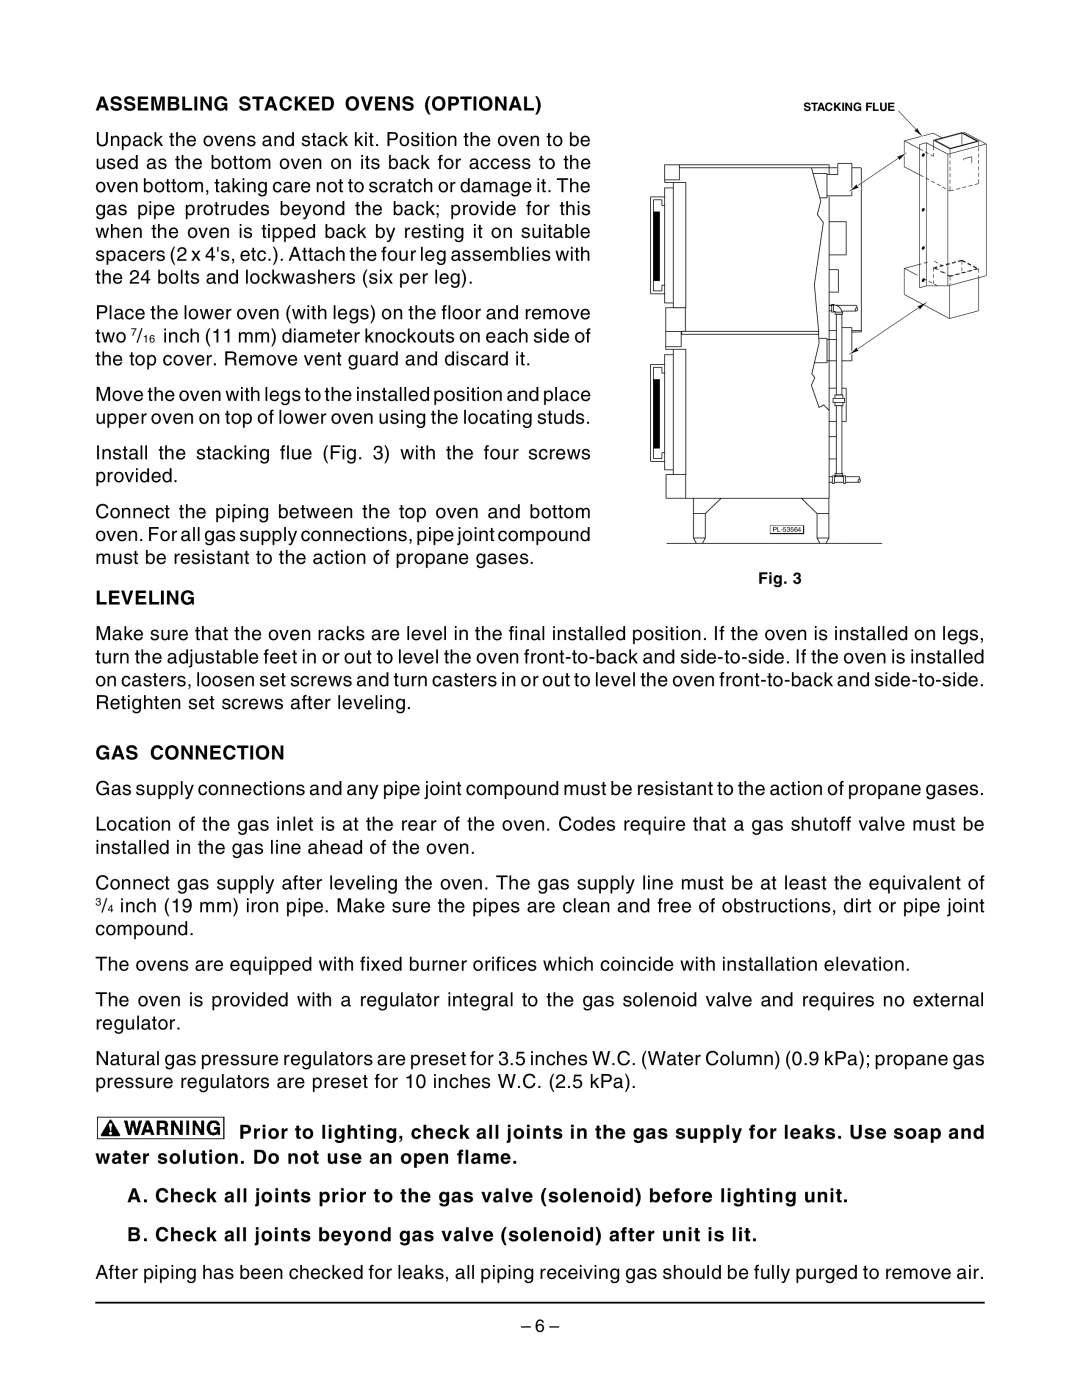 Wolf Appliance Company WKGD ML-126621 owner manual Assembling Stacked Ovens Optional, Leveling, Gas Connection 